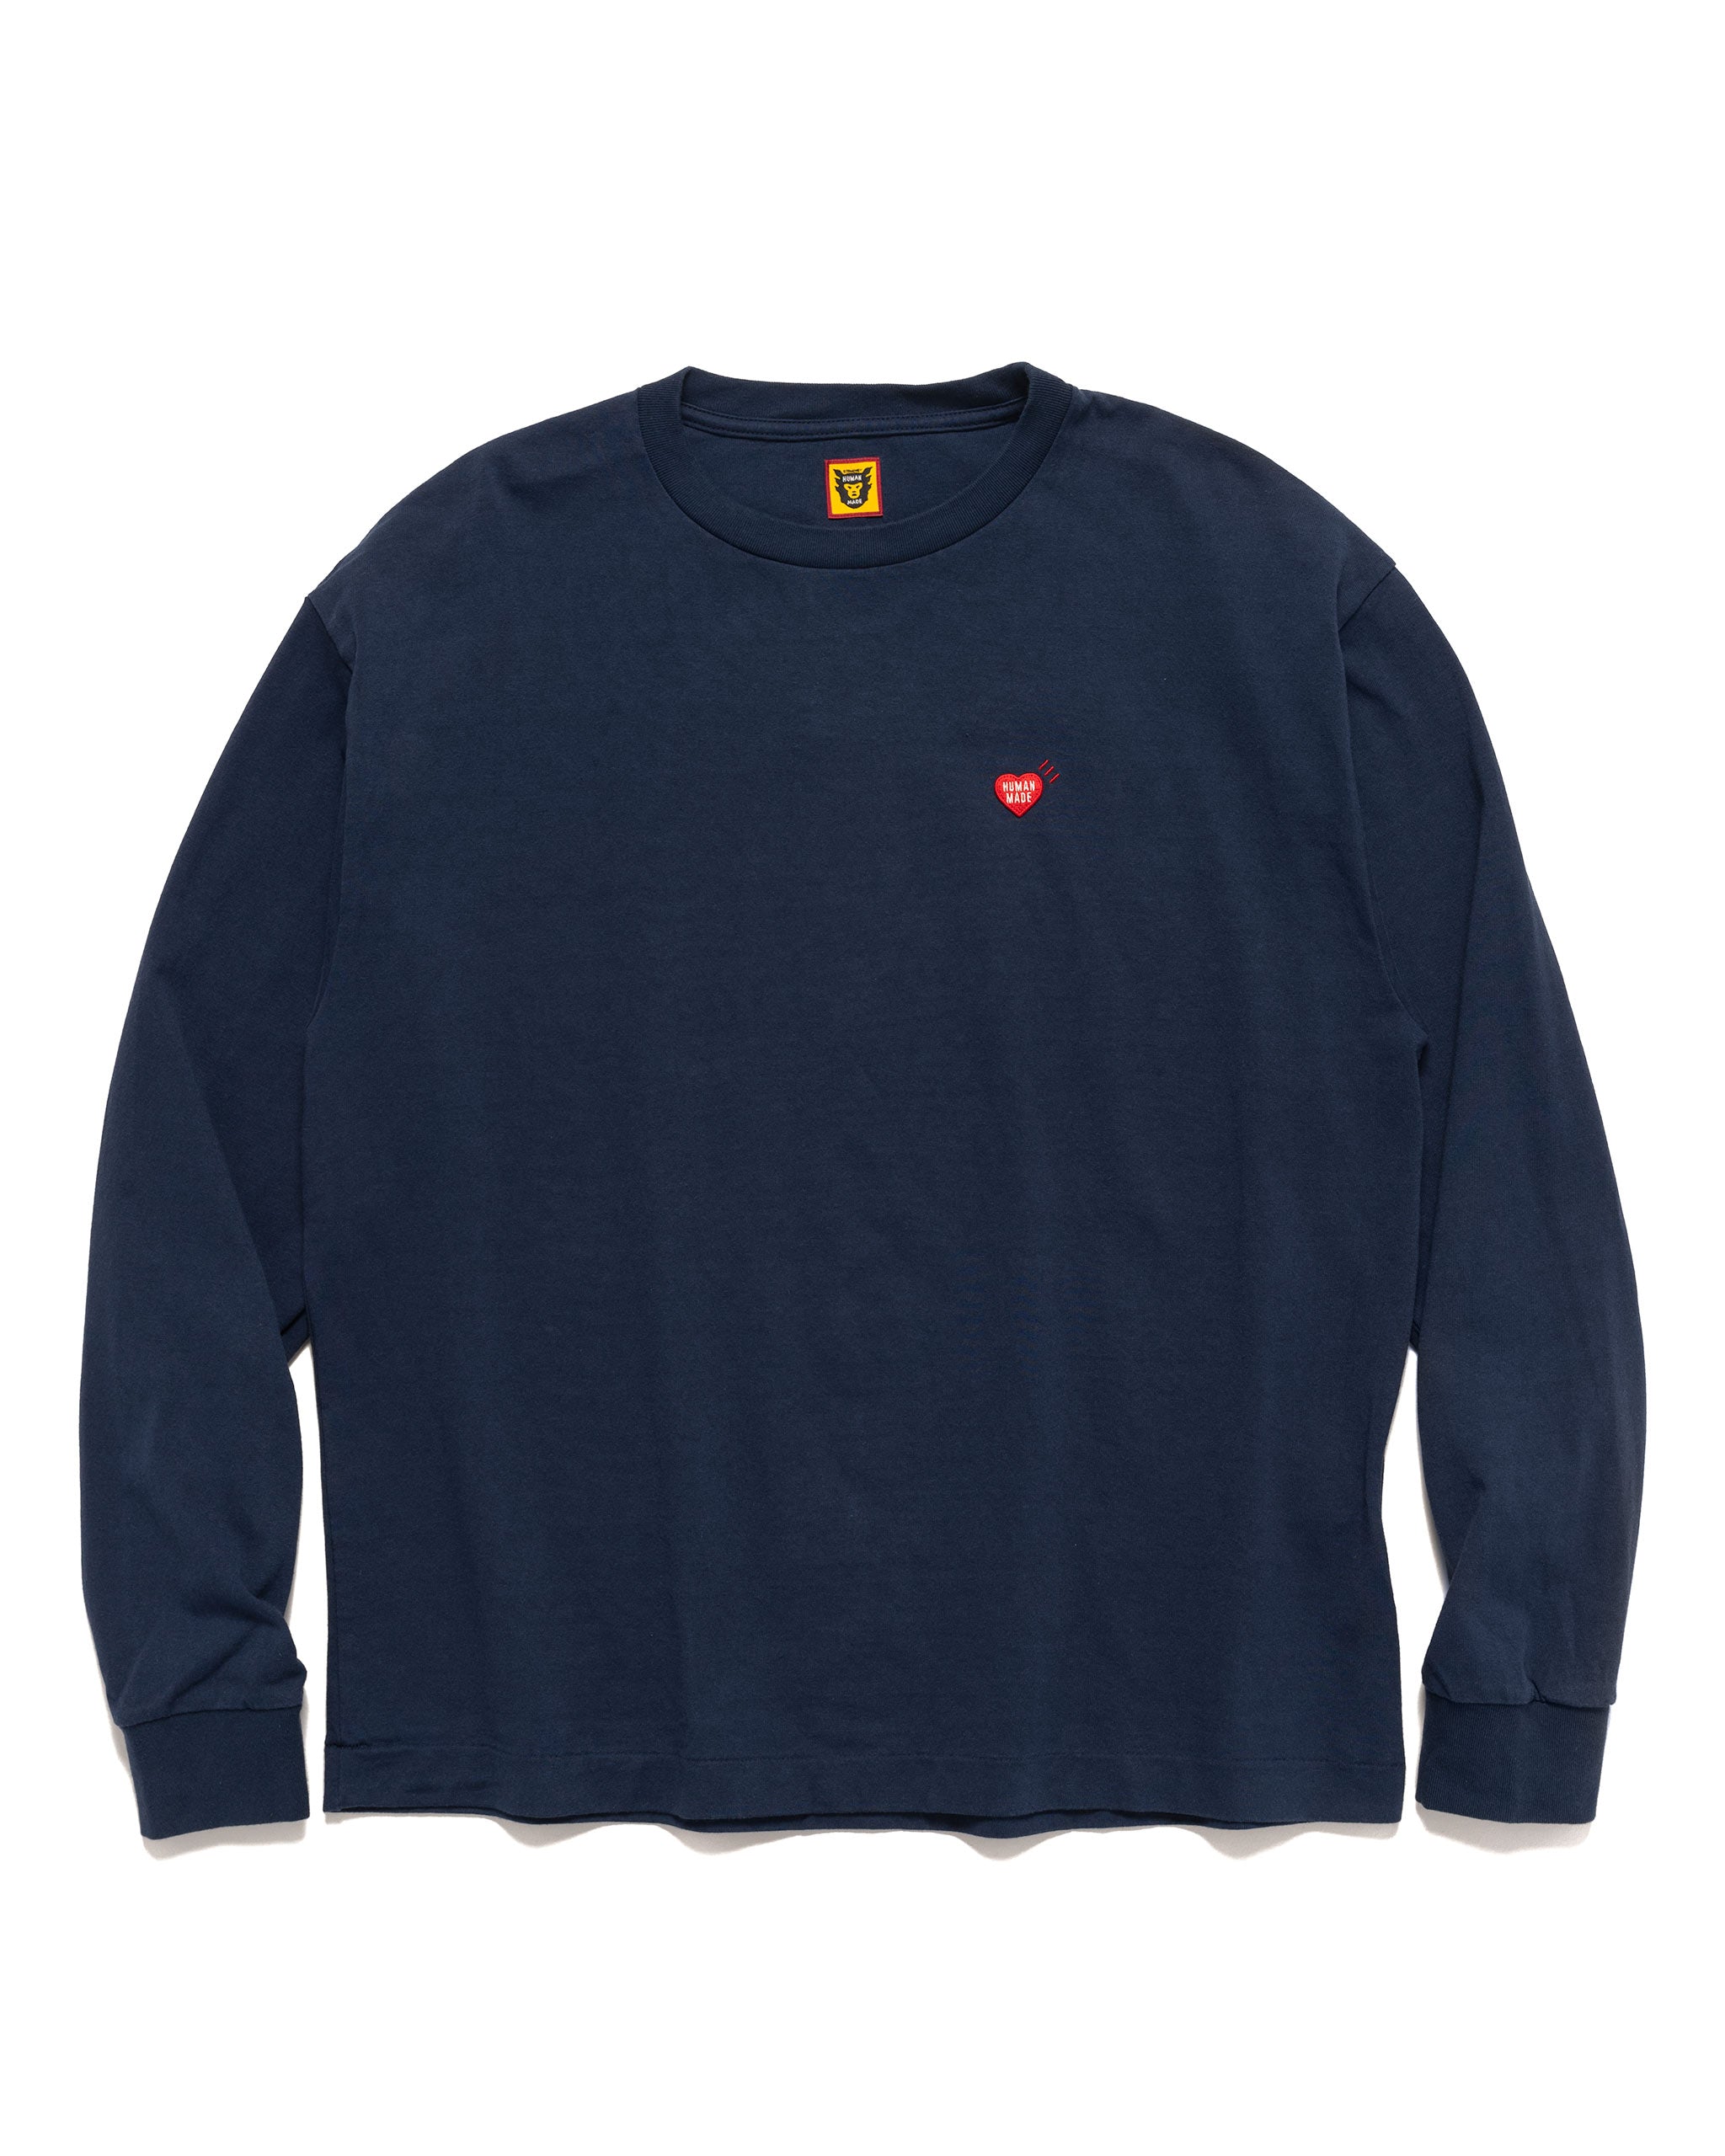 Human Made Graphic L/S T-Shirt #3 Navy-